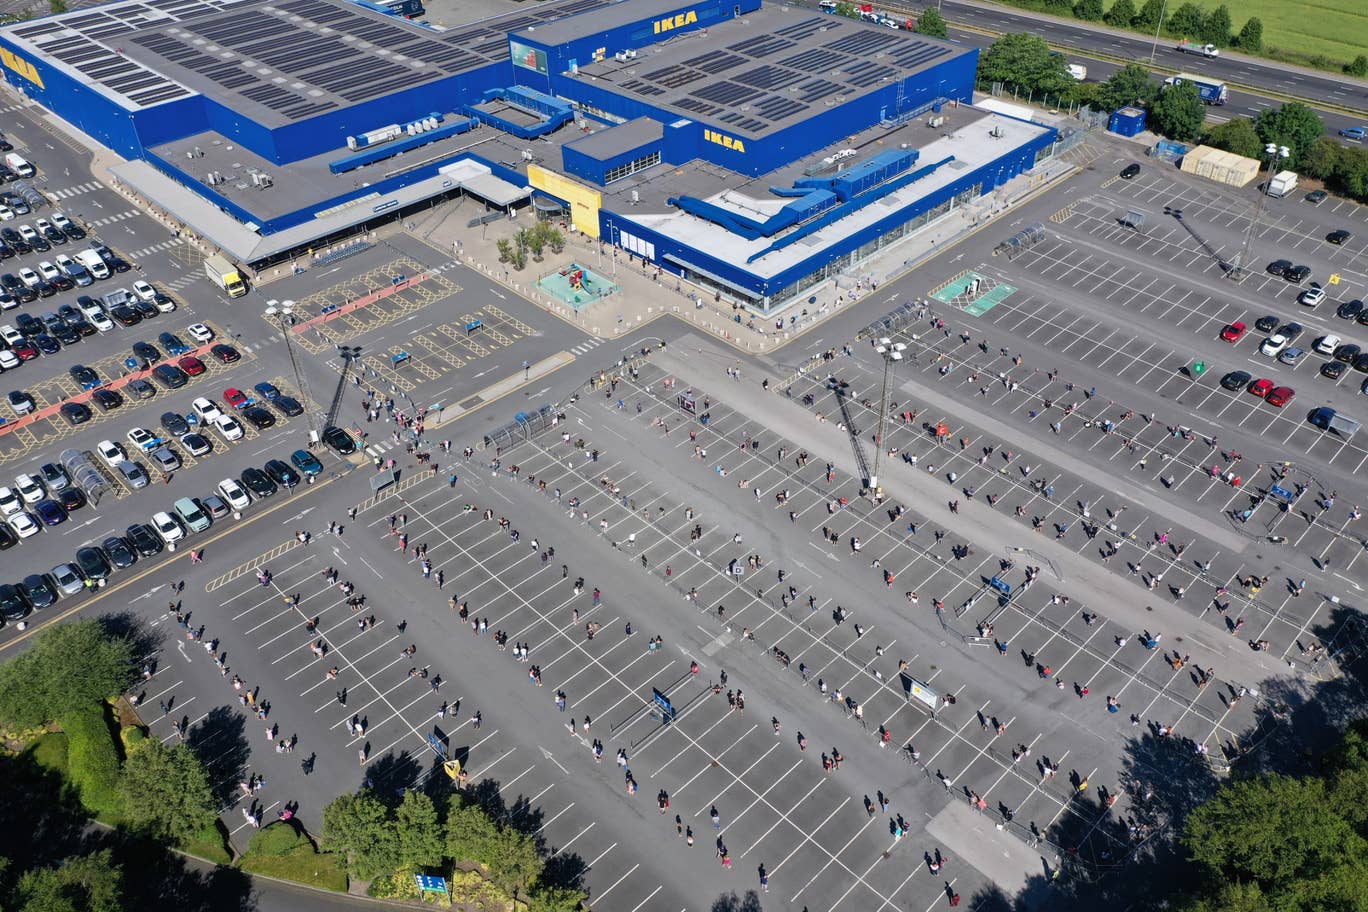 Overhead shot of Ikea store and parking lot